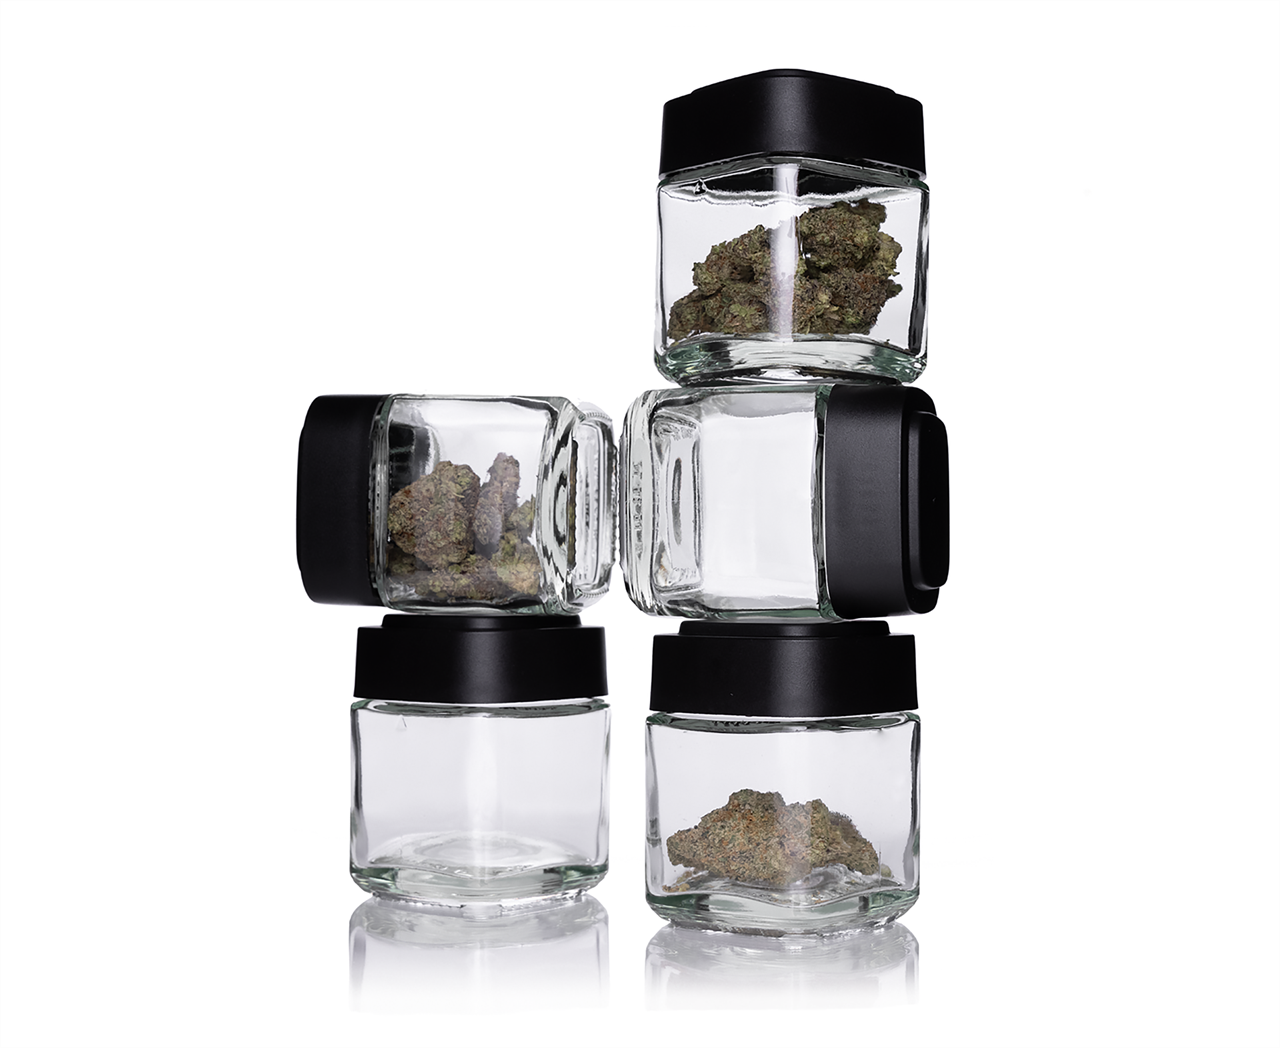 Calyx glass cannabis container containing buds